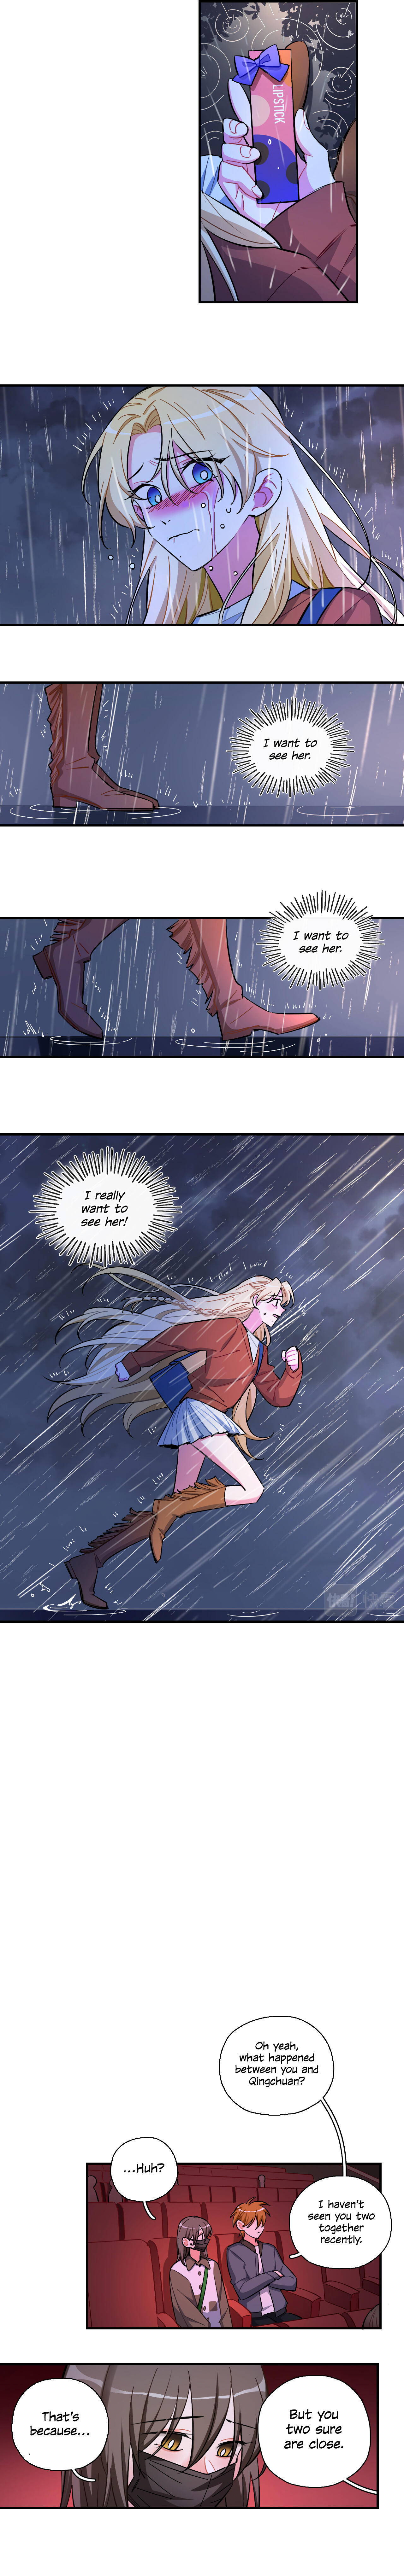 Almost Friends Chapter 39: I Want To See You page 7 - Mangakakalots.com